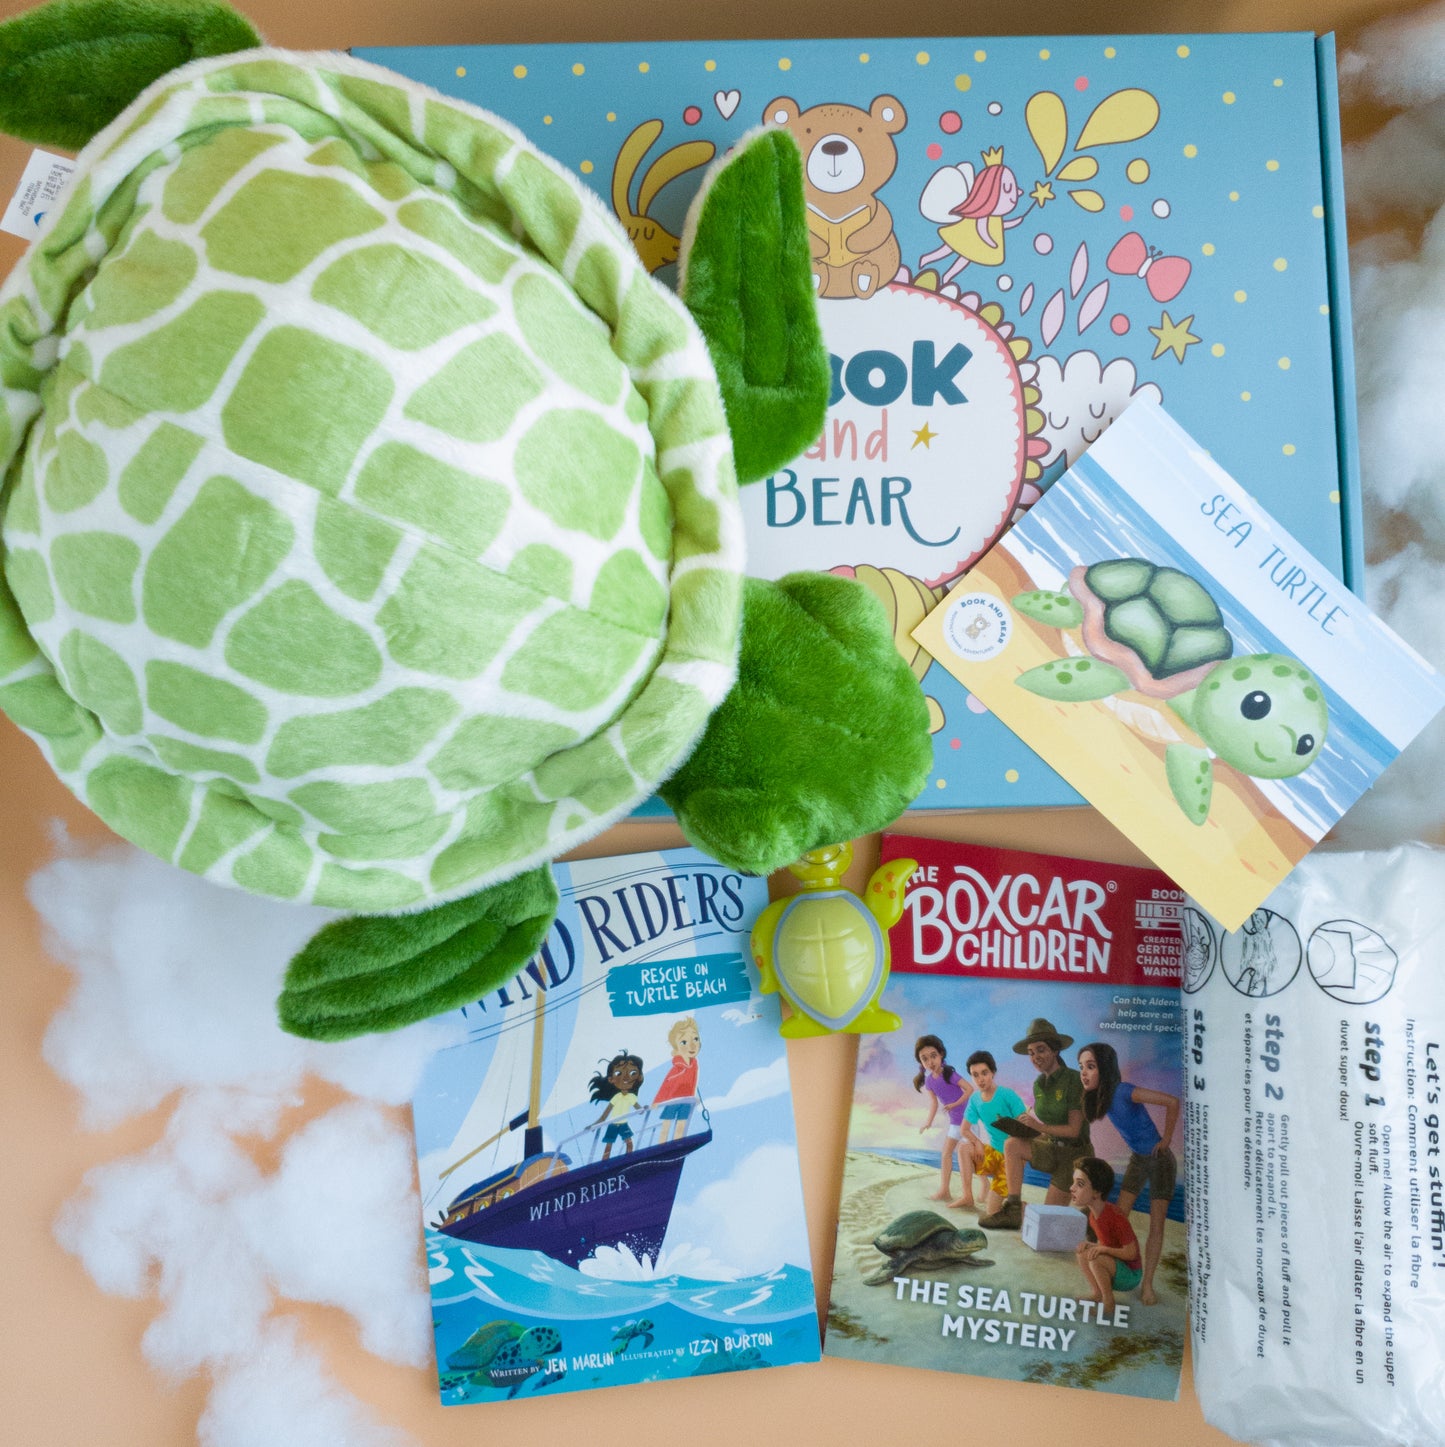 Book & Bear Deluxe Subscription Box - Chapter Book